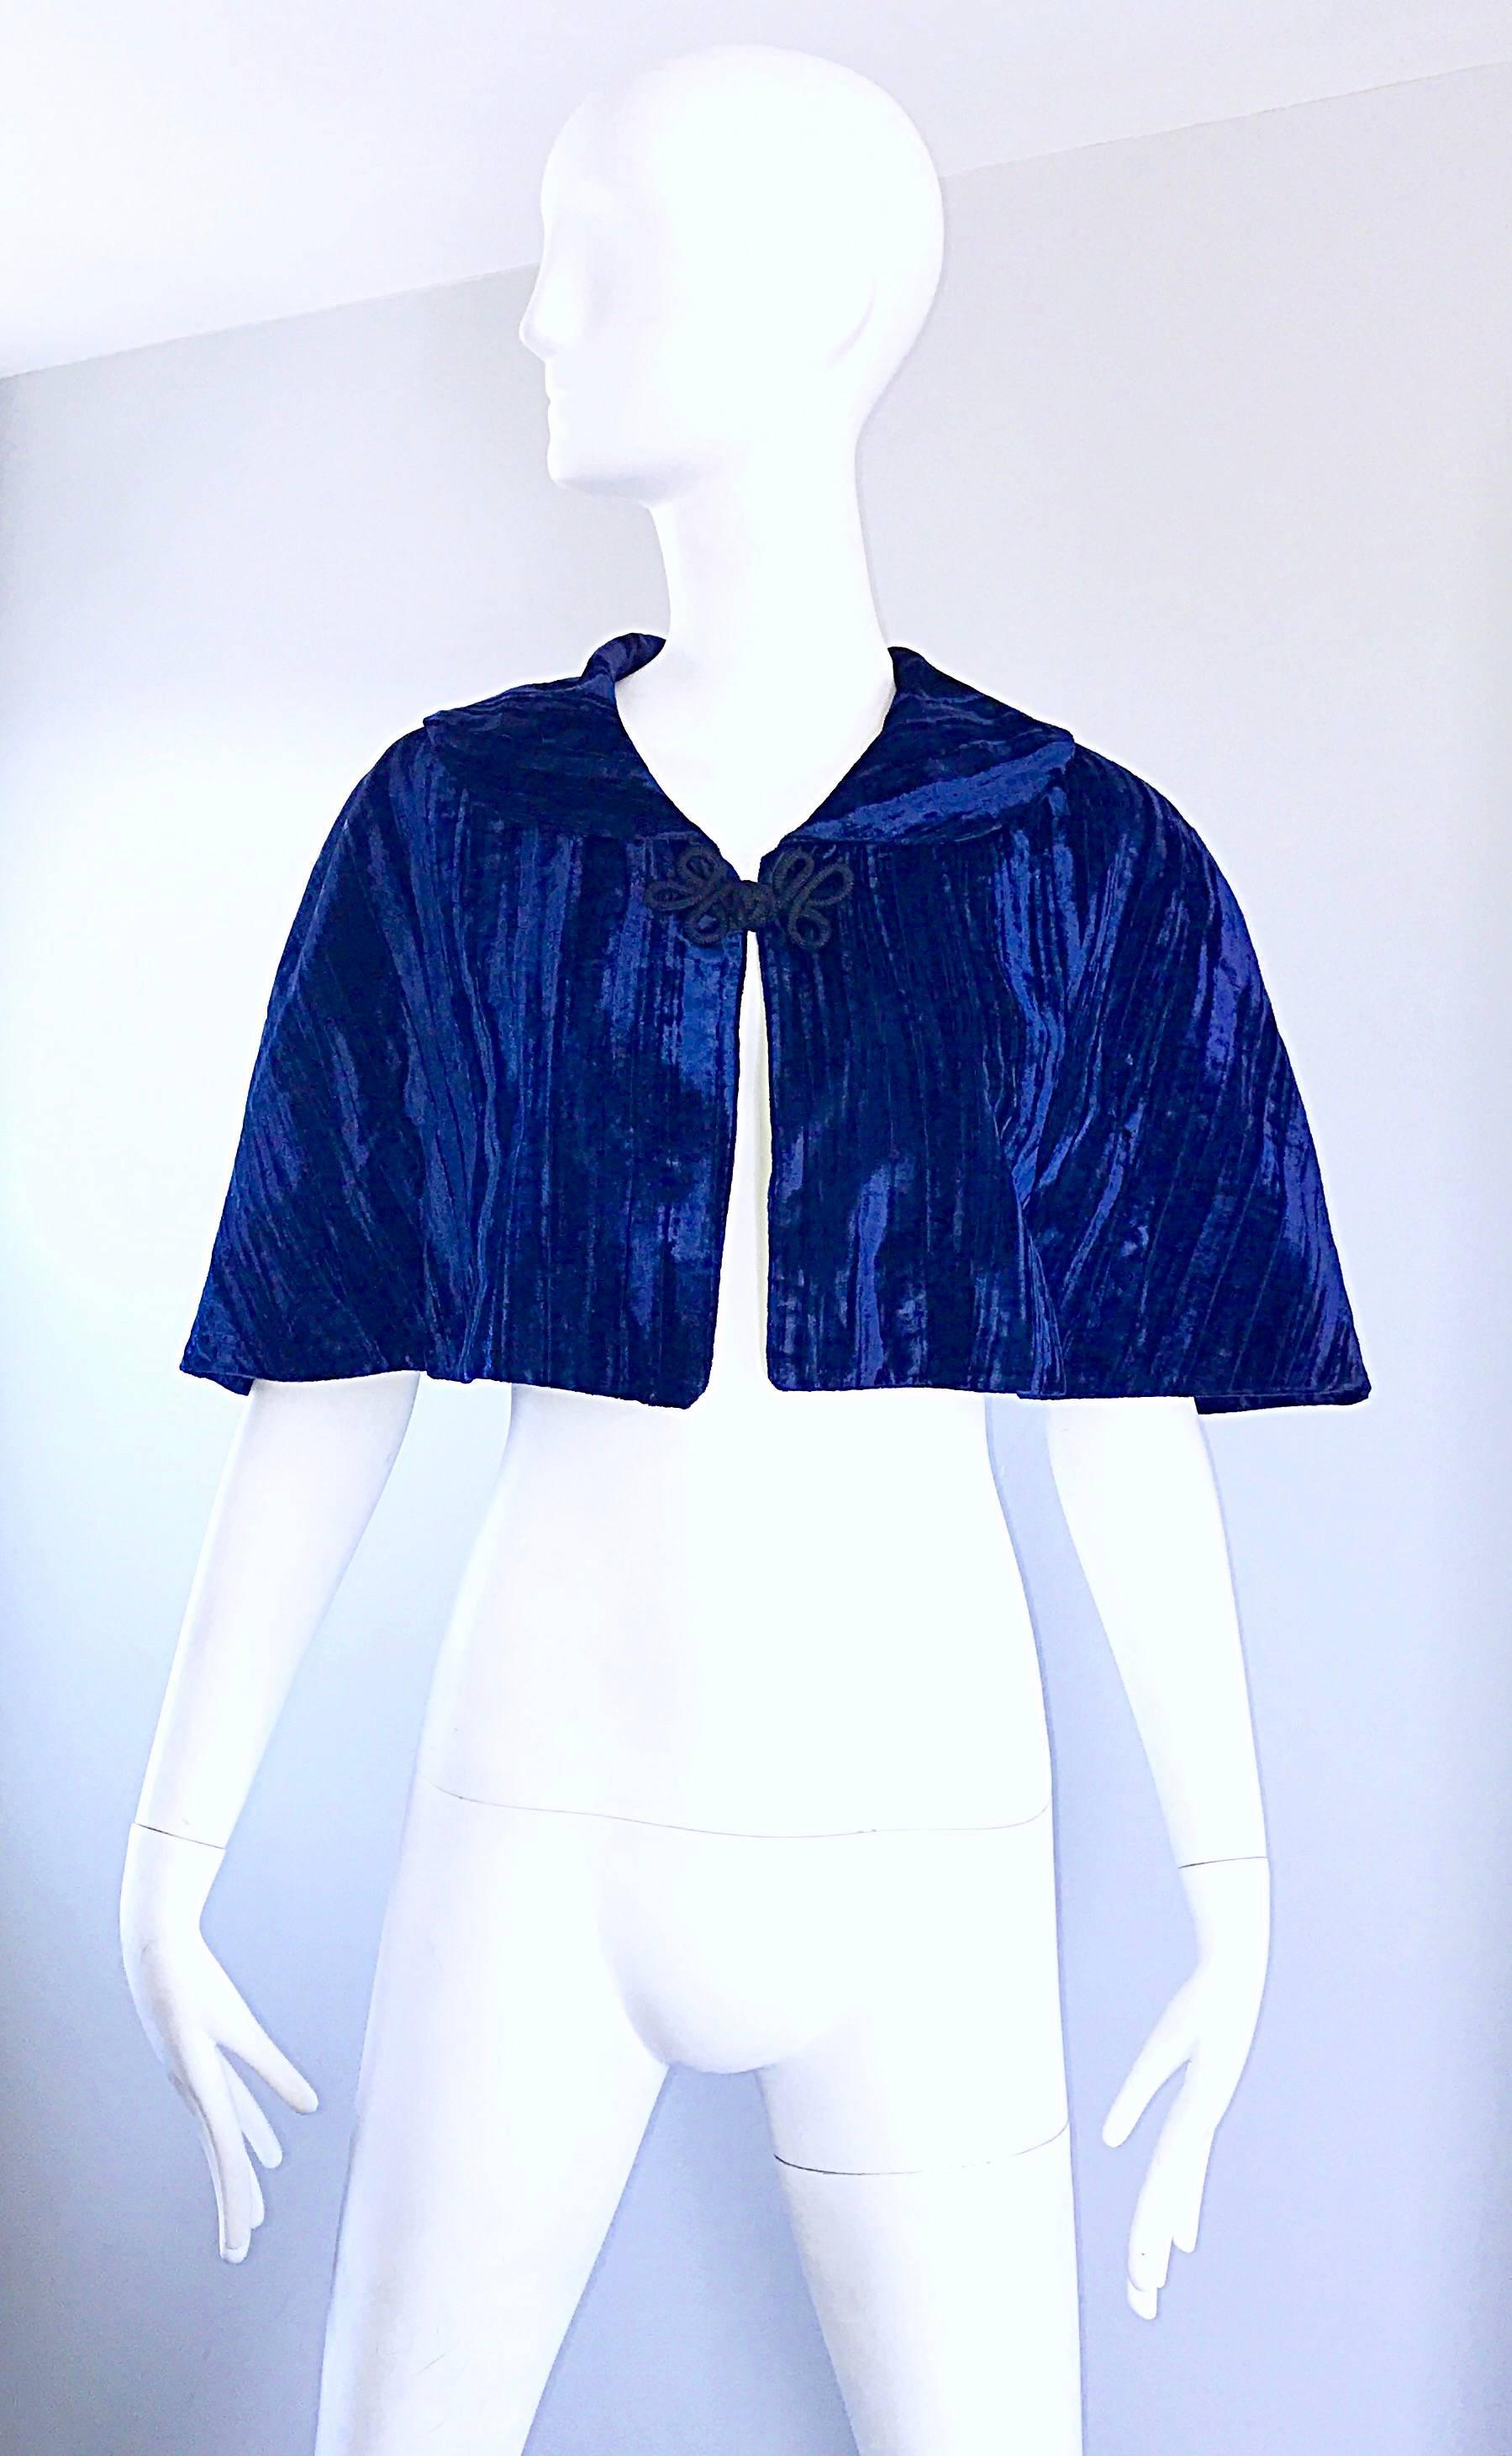 Such a beautiful vintage 1930s couture navy blue velvet caplet! Features vibrant navy blue textured silk velvet. Intricate black embroidered Russian inspired clasp at neck. Looks fantastic with movement! Can easily be dressed up or down. Great with